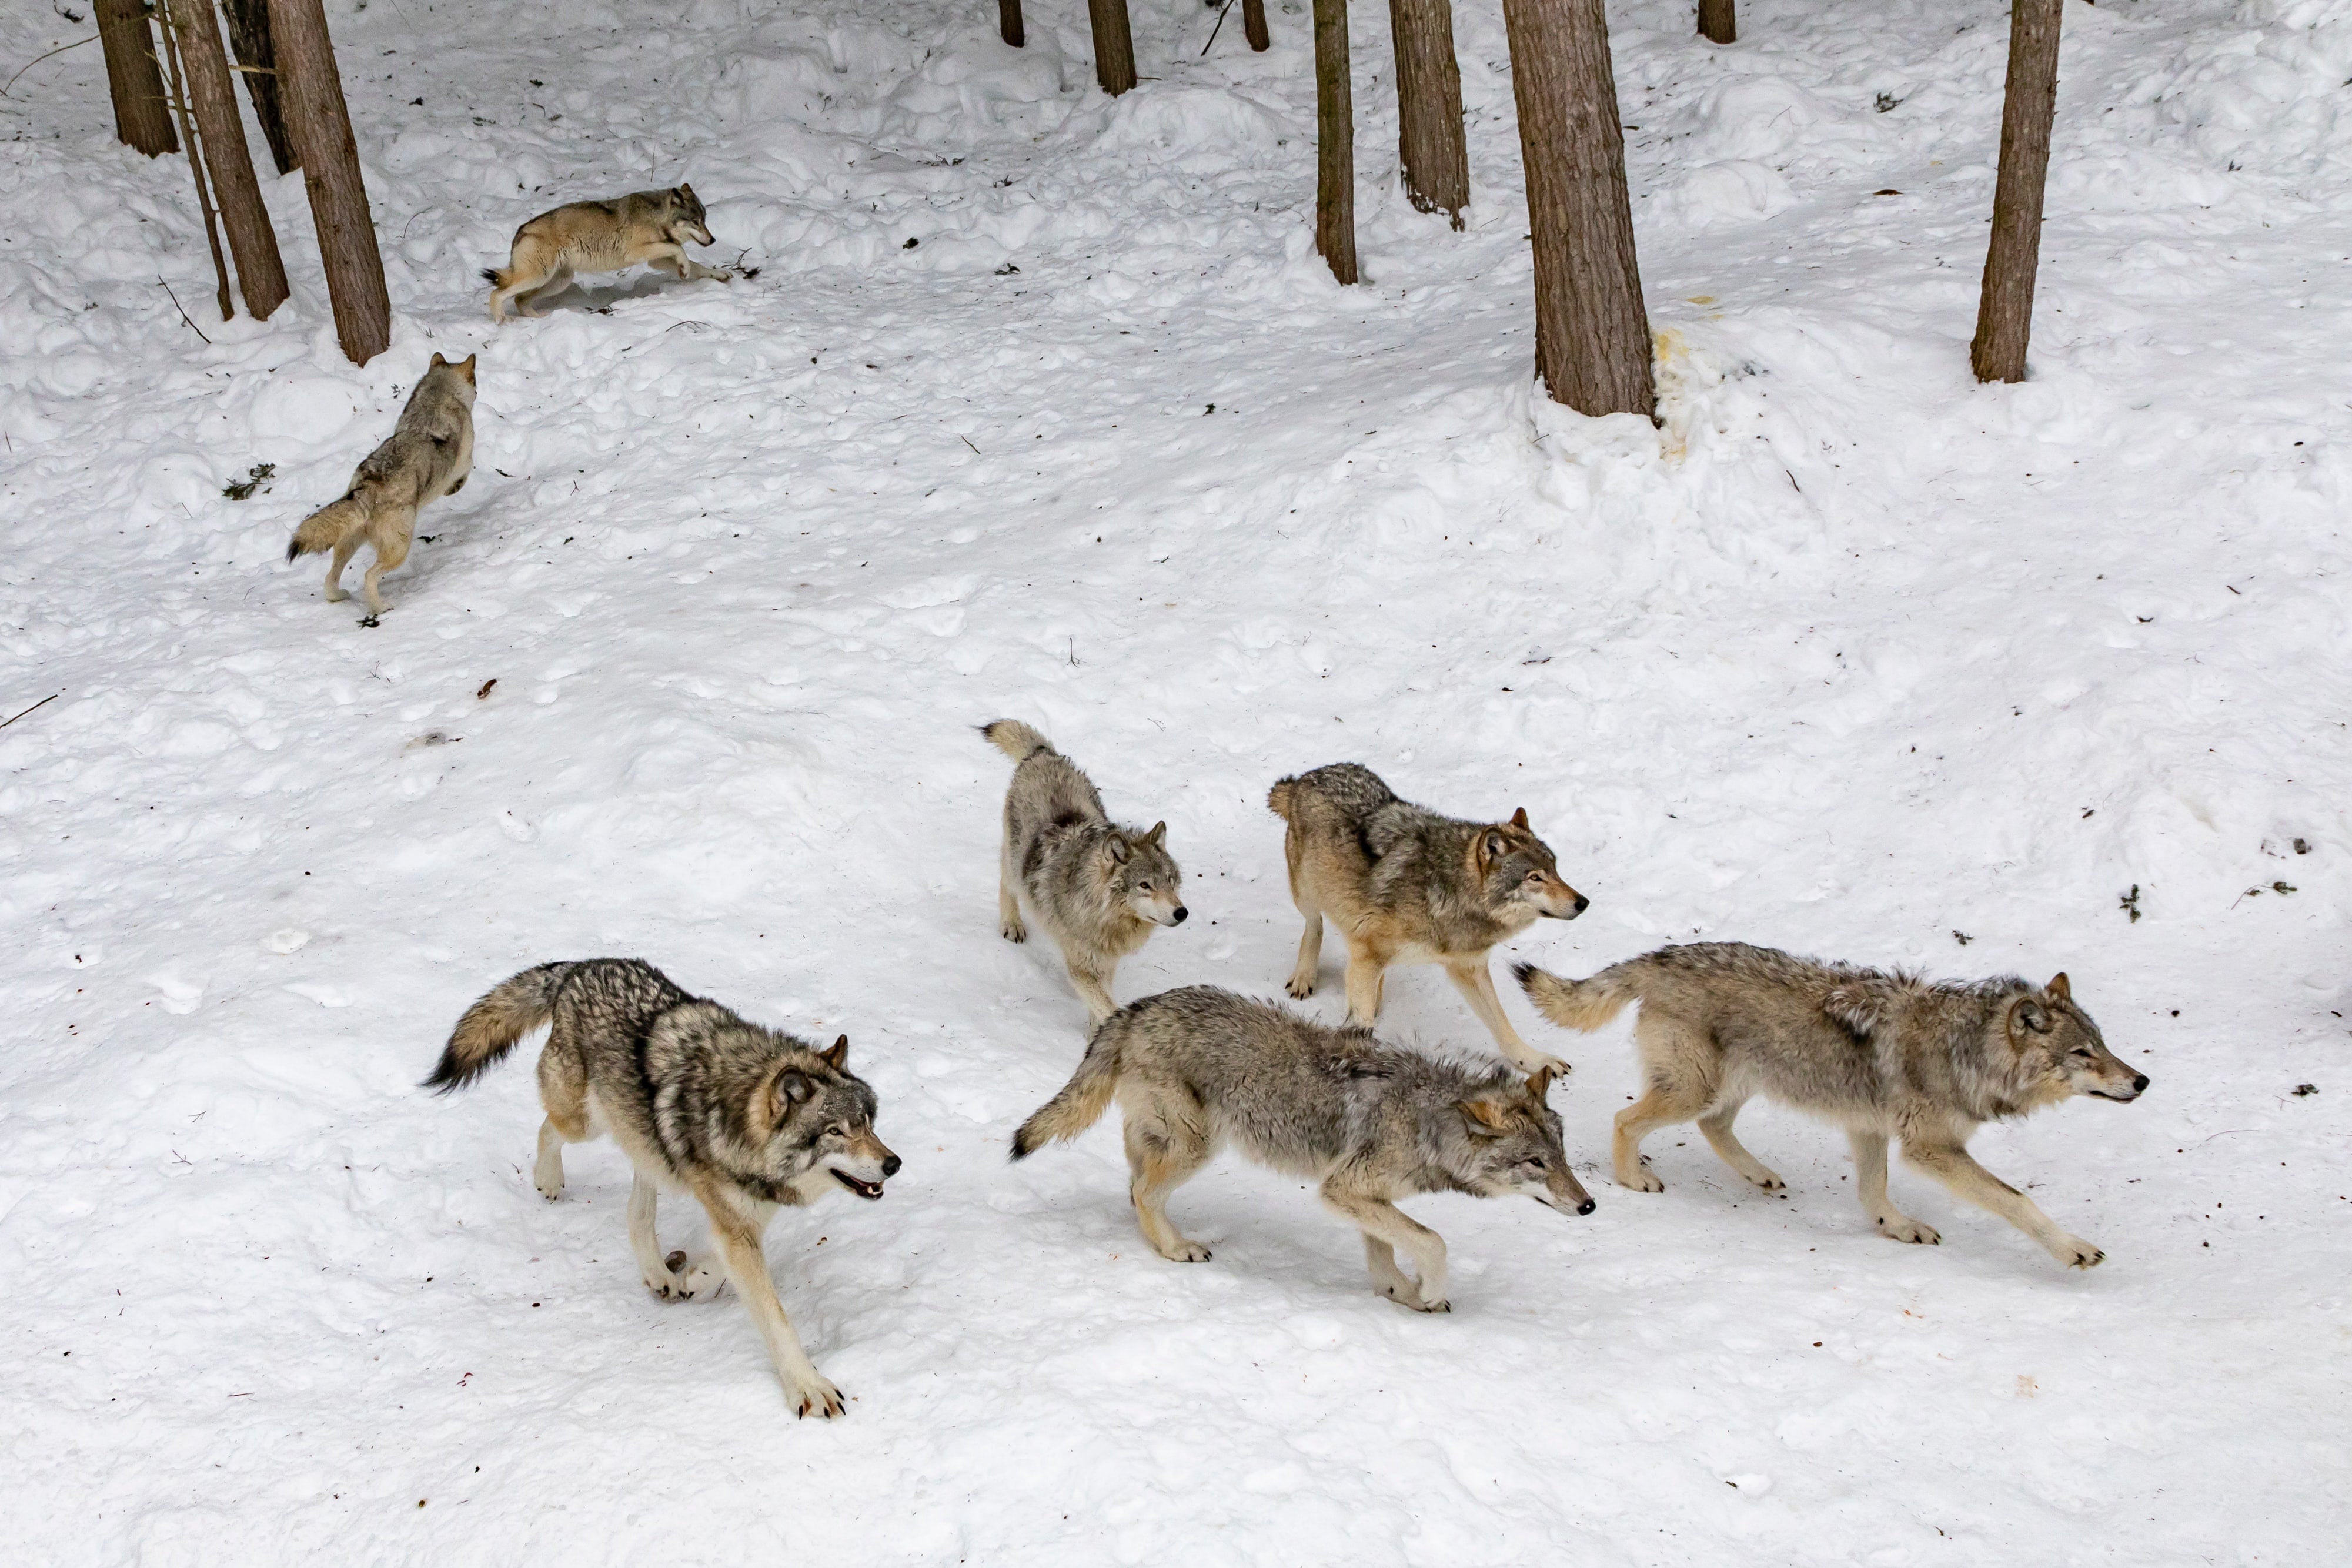 Five wolves walk in a snow-covered woods while two straggle behind.